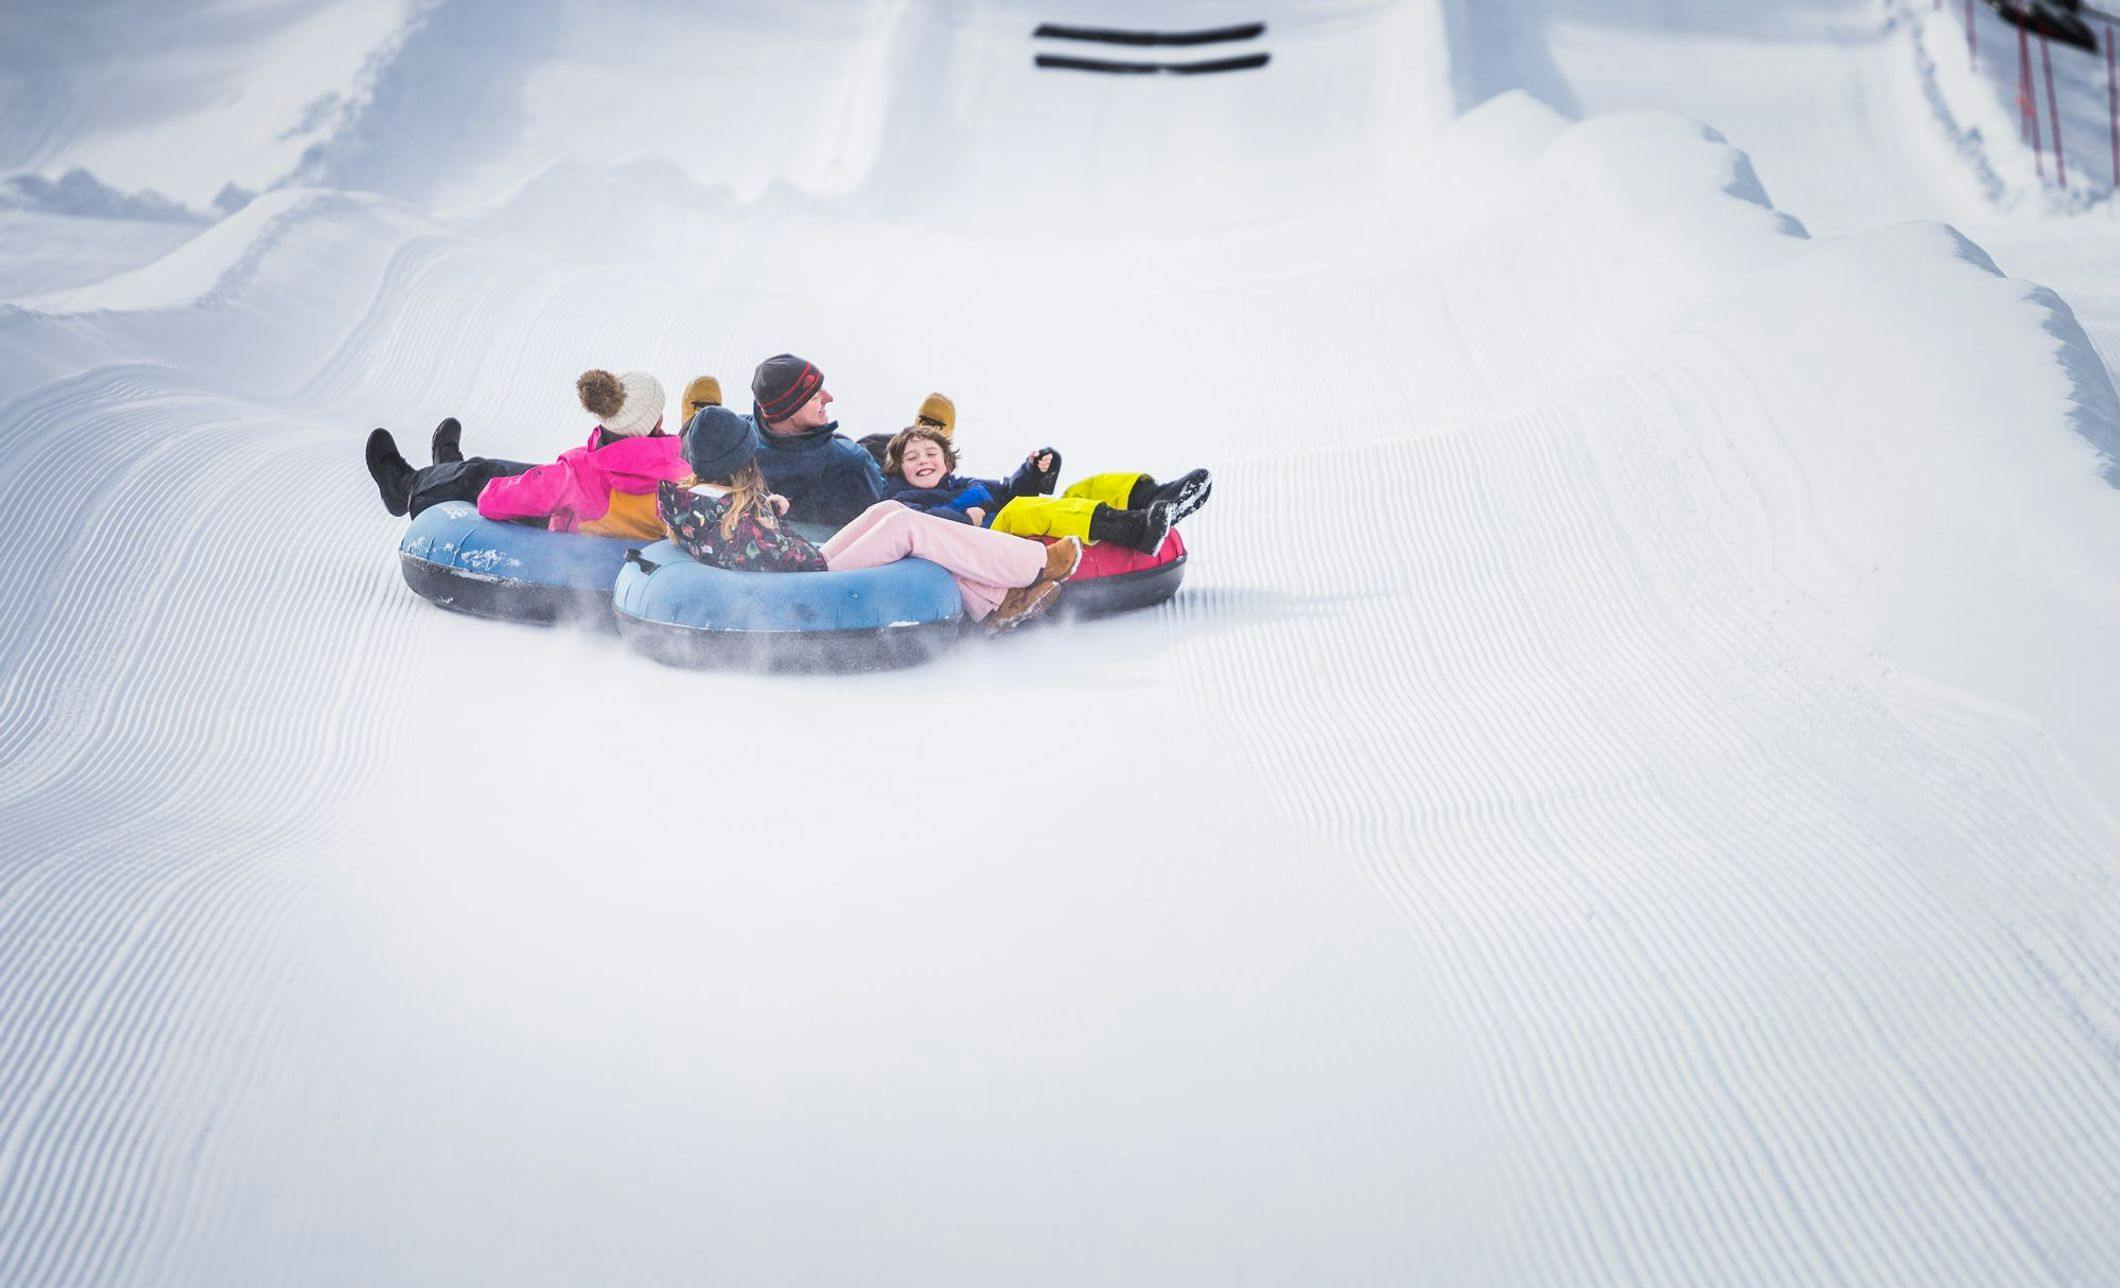 A family of four in separate tubes sliding down a hill together